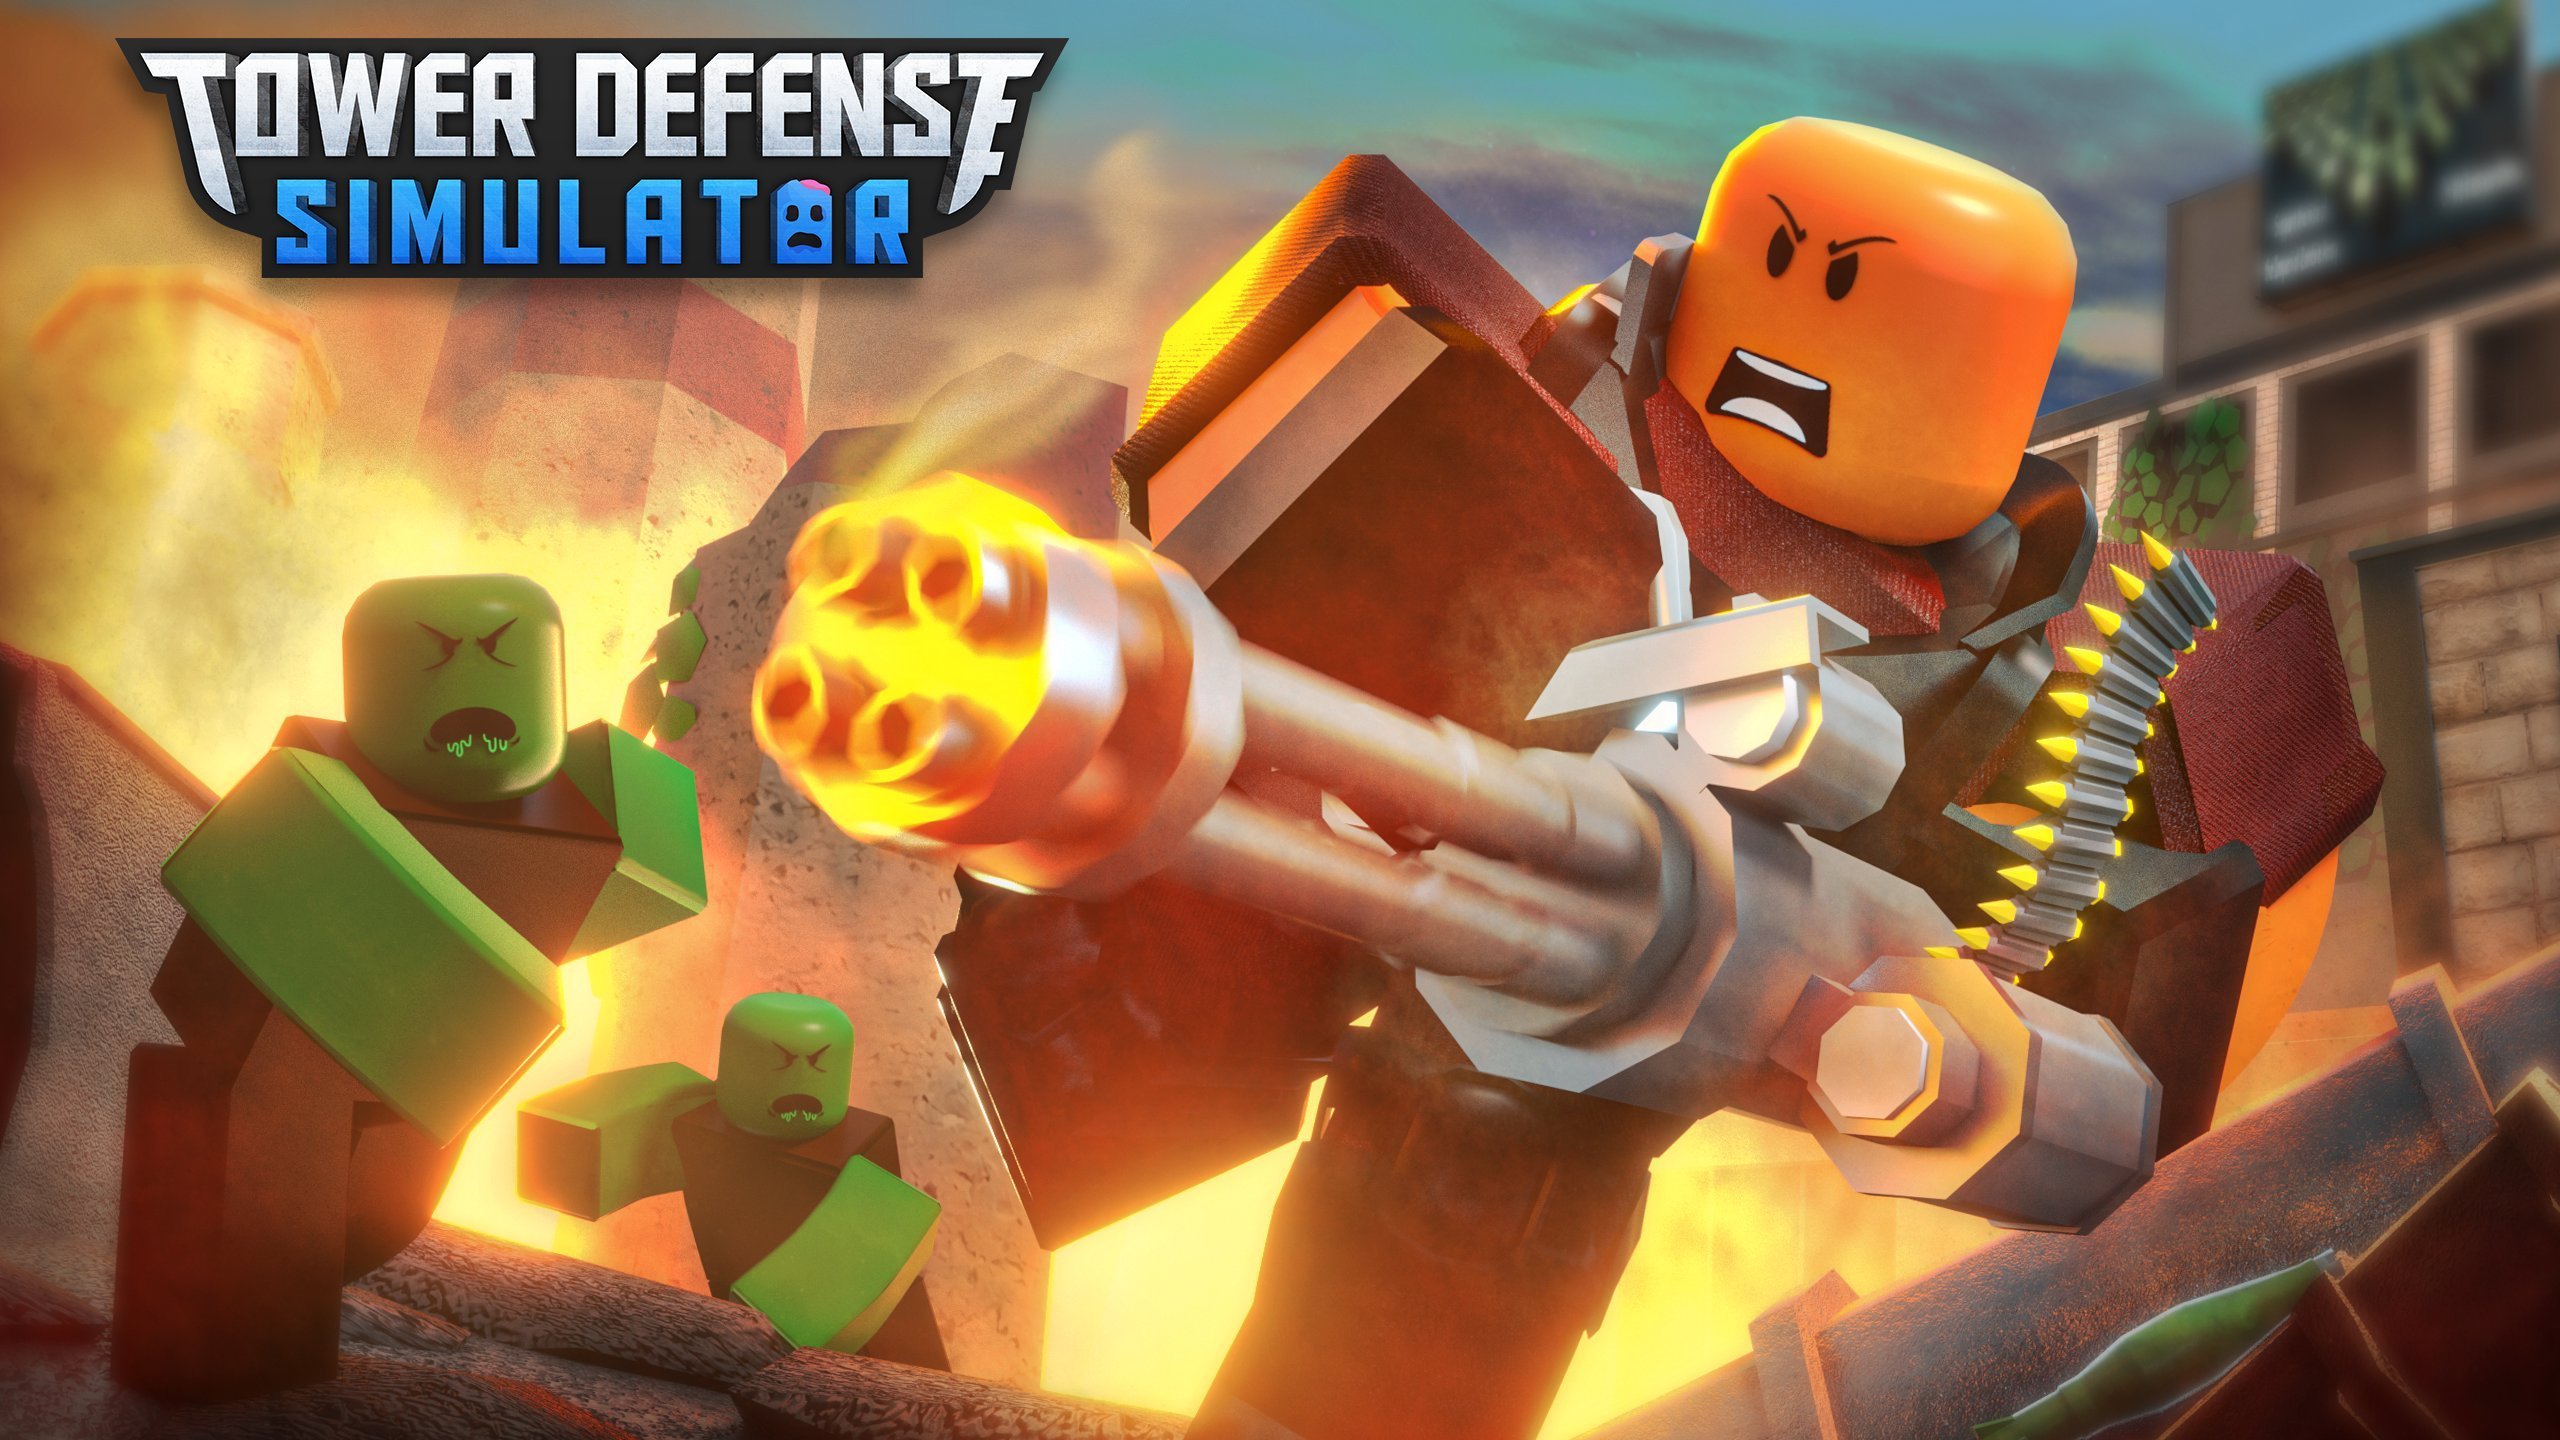 Roblox Tower Defense Wallpapers - Wallpaper Cave